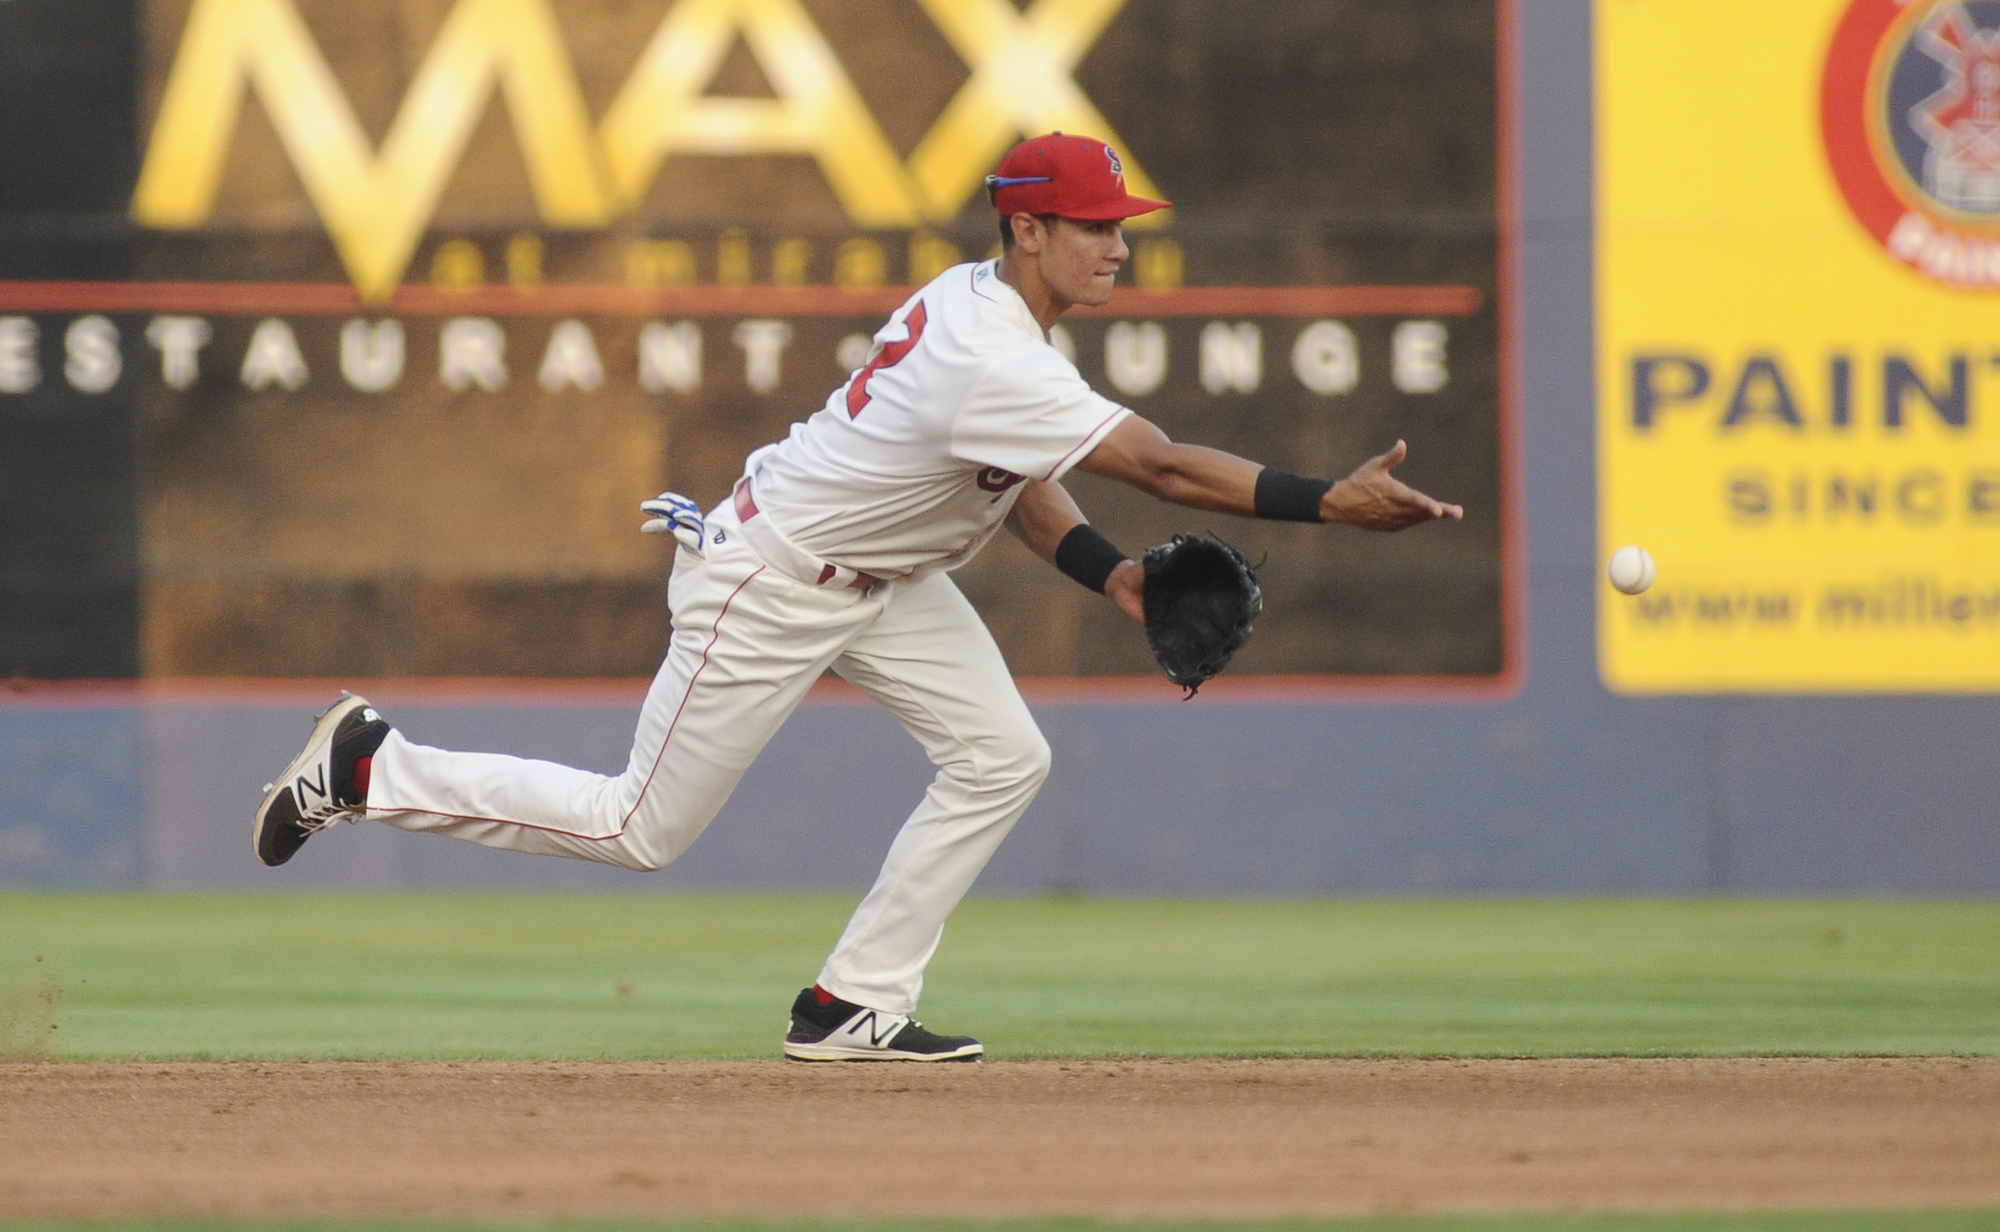 Kole Enright has six extra-base hits and nine RBIs for Spokane in 40 games this season. Photo courtesy James Snook